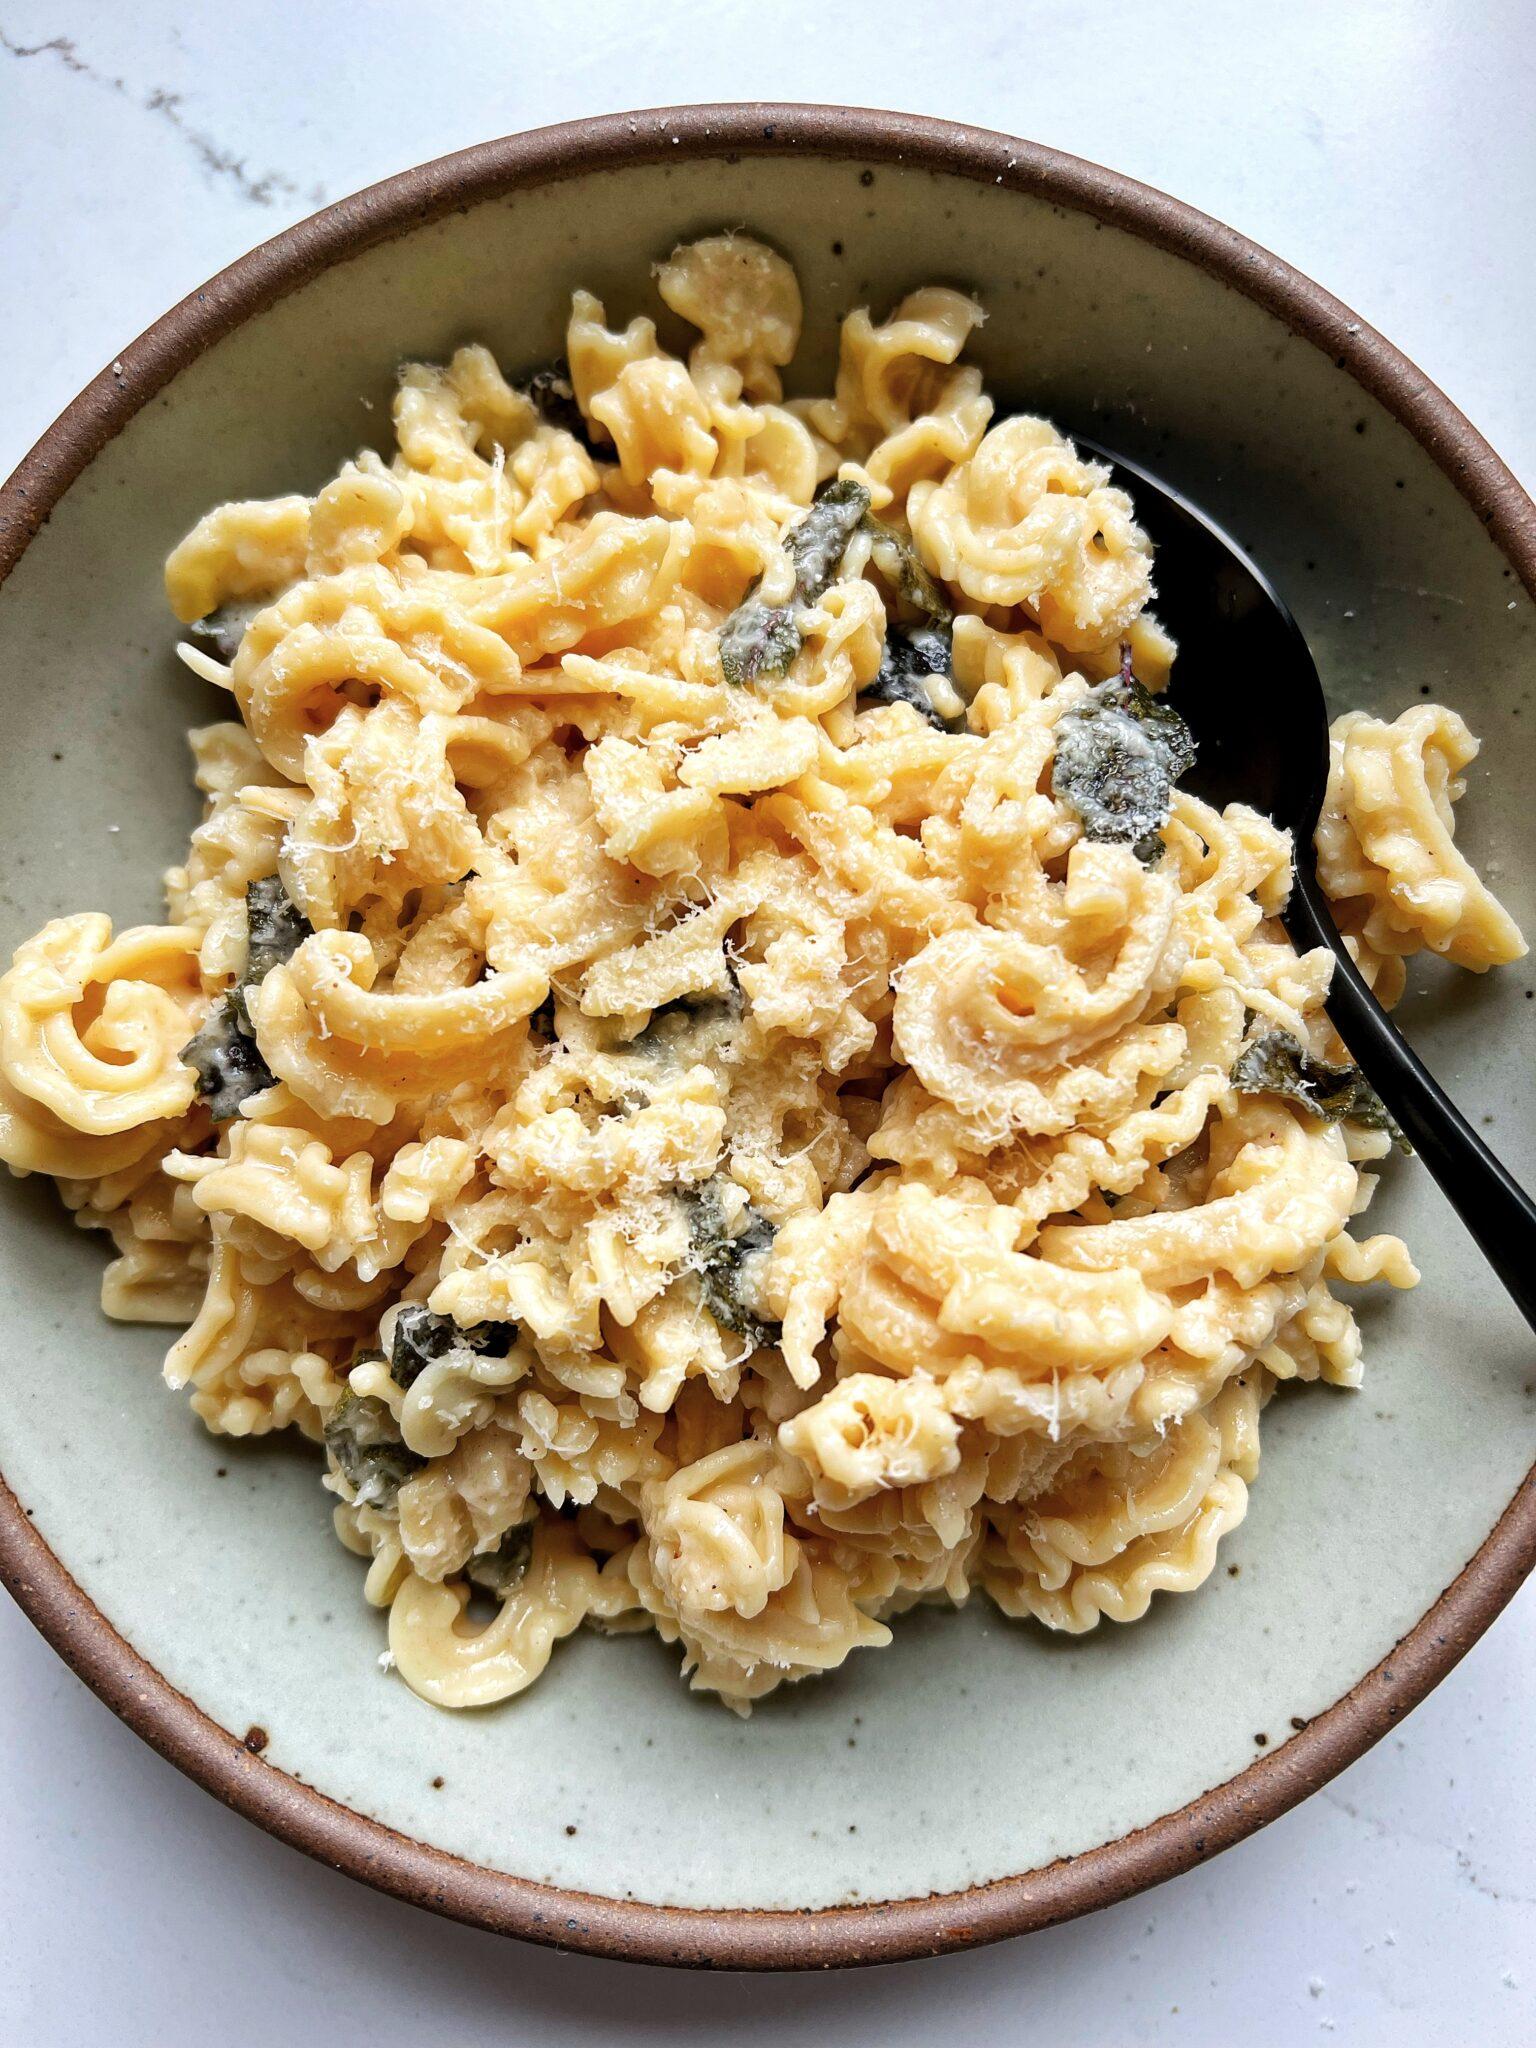 This 10-minute meal is gluten-free, and made with just four ingredients – easy peasy! (via <a href="https://rachlmansfield.com/10-minute-brown-butter-sage-pasta-gluten-freebrown-butter-sage-pasta-gluten-free/"><strong>Rachel Mansfield</strong></a>)